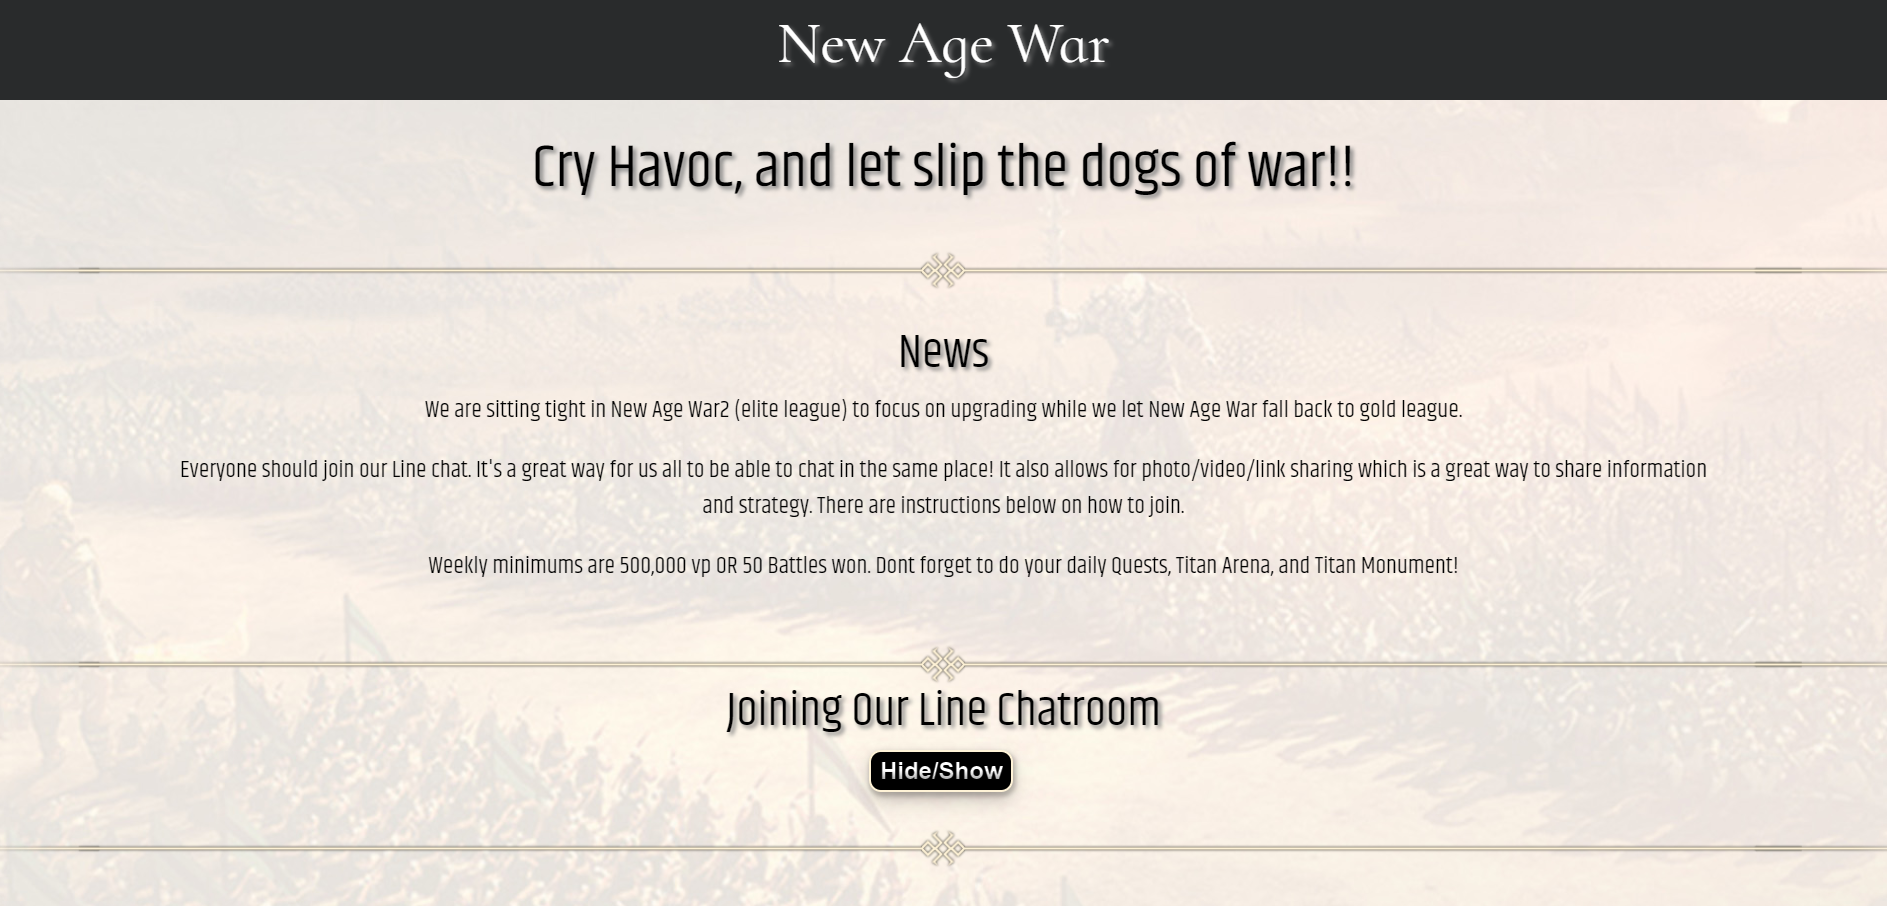 Landing page for the mobile game utility displaying banner and news sections.